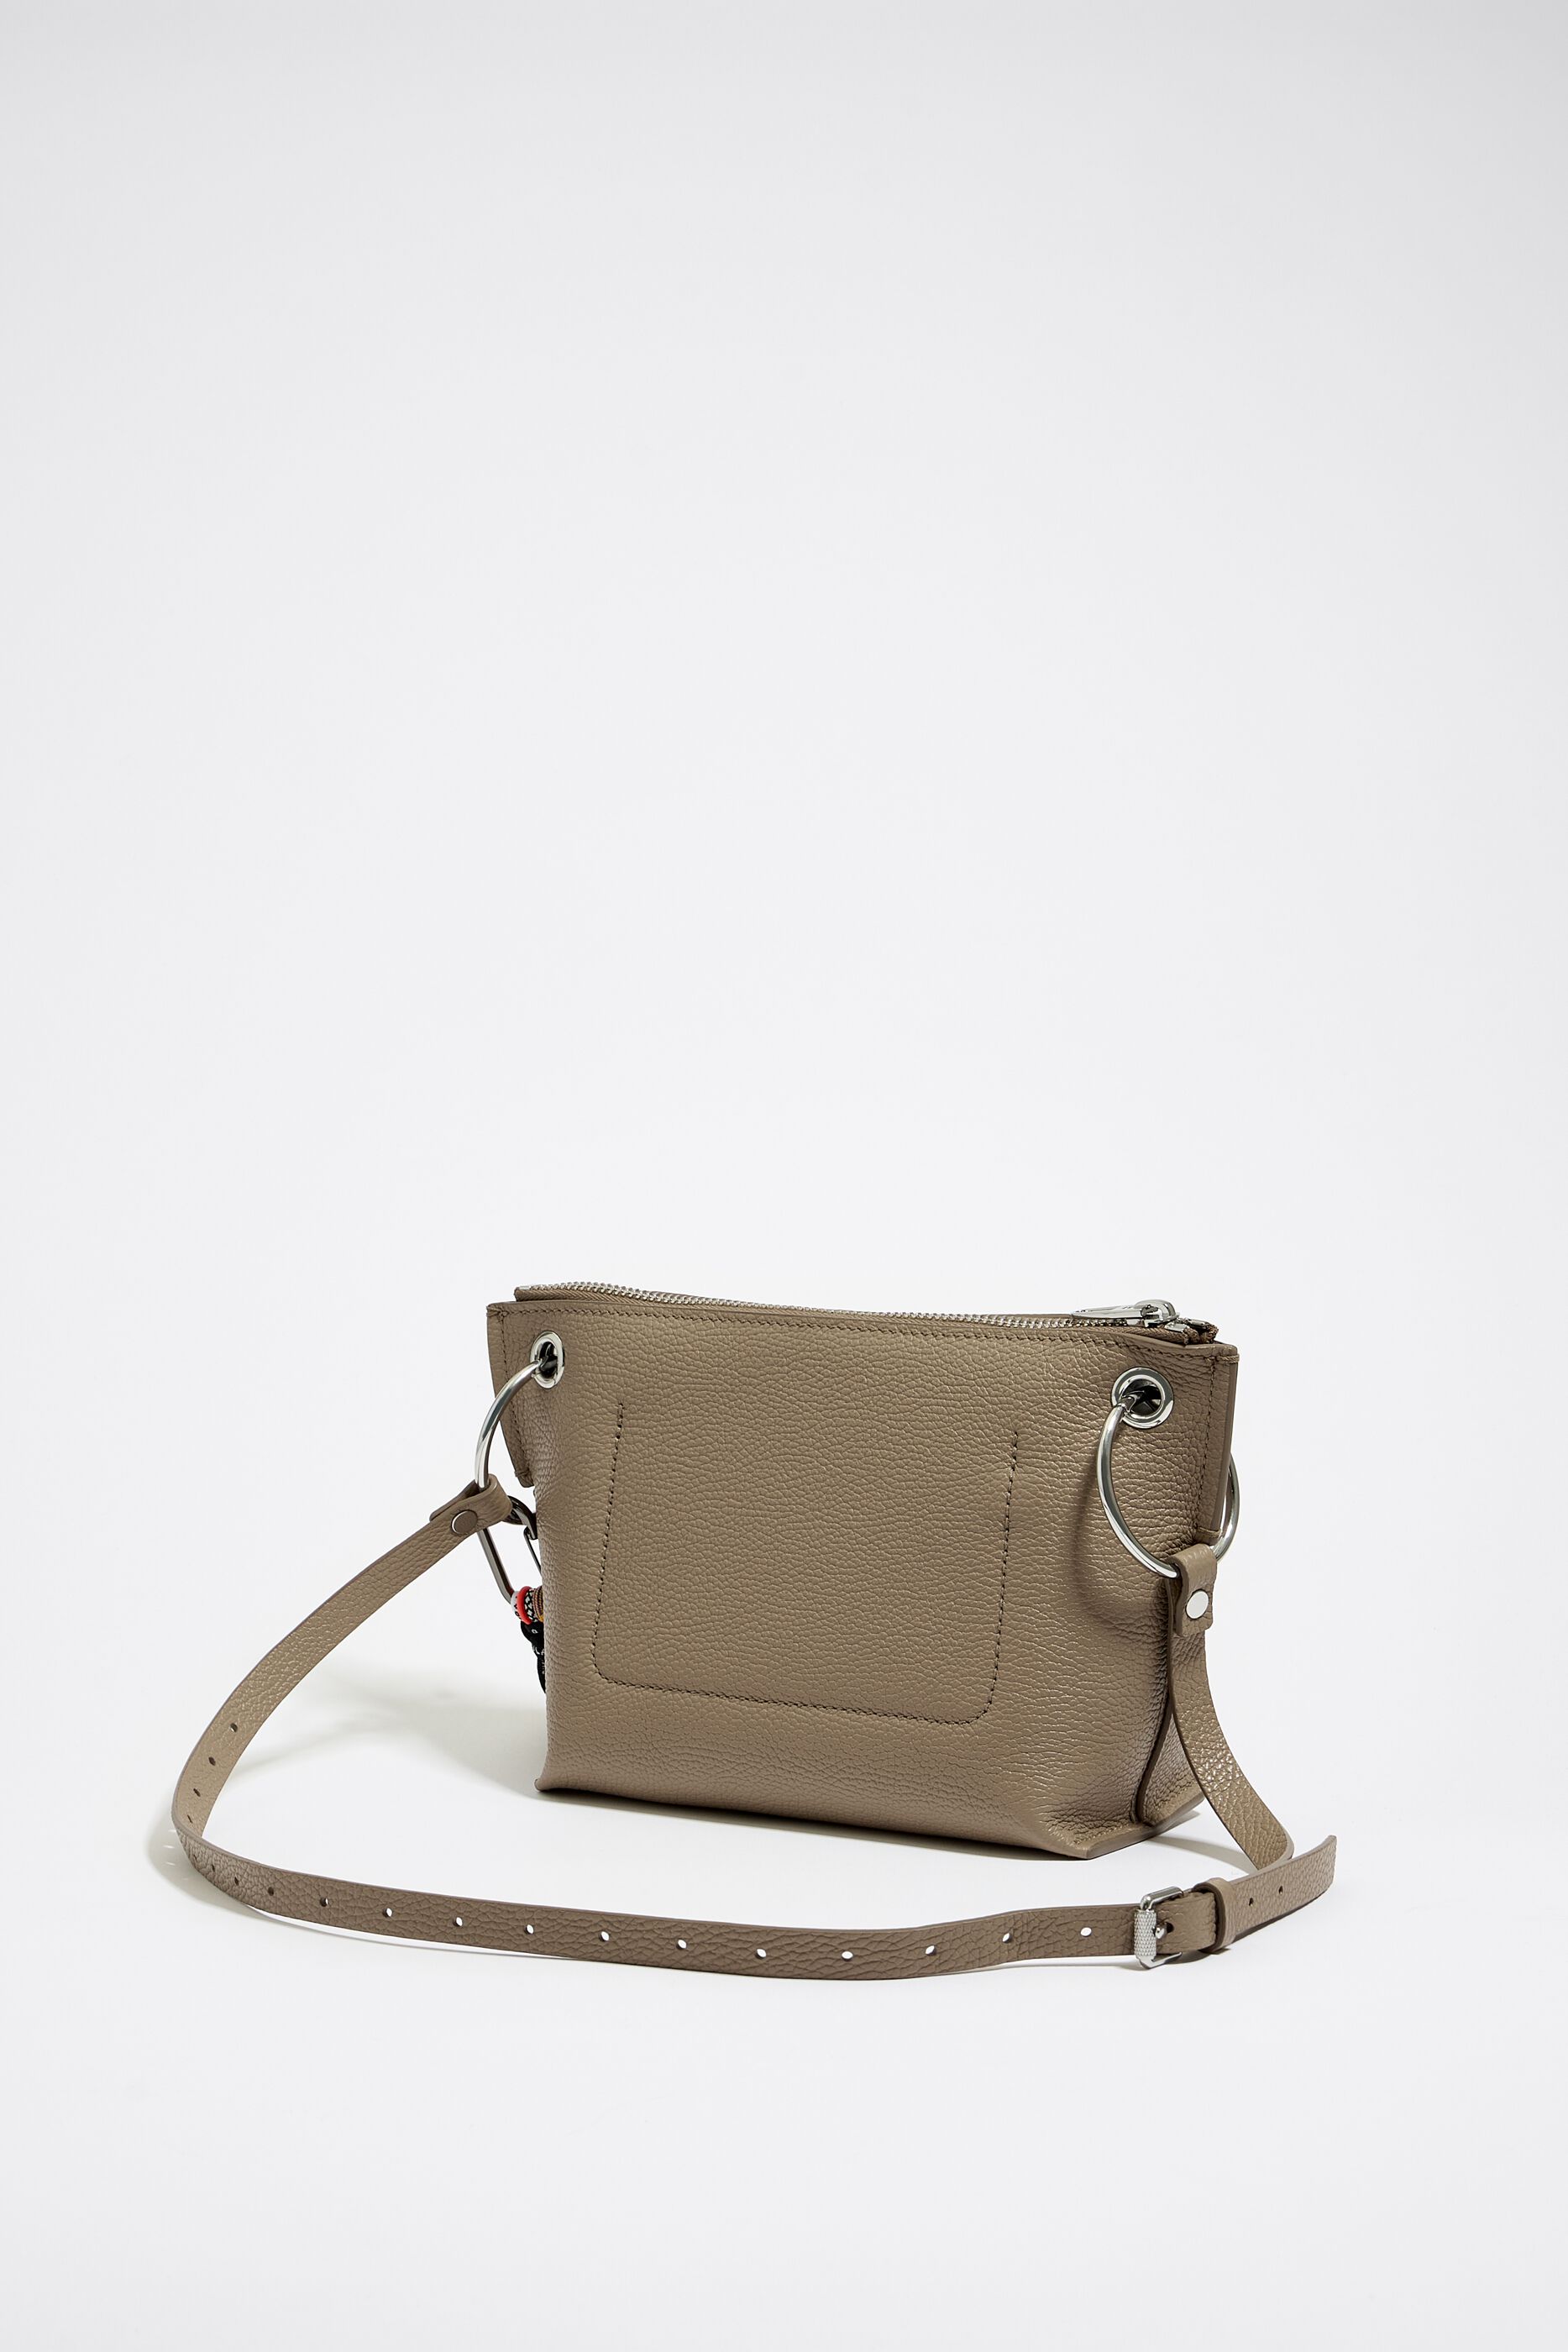 Sold at Auction: Dooney & Burke Taupe Crossbody